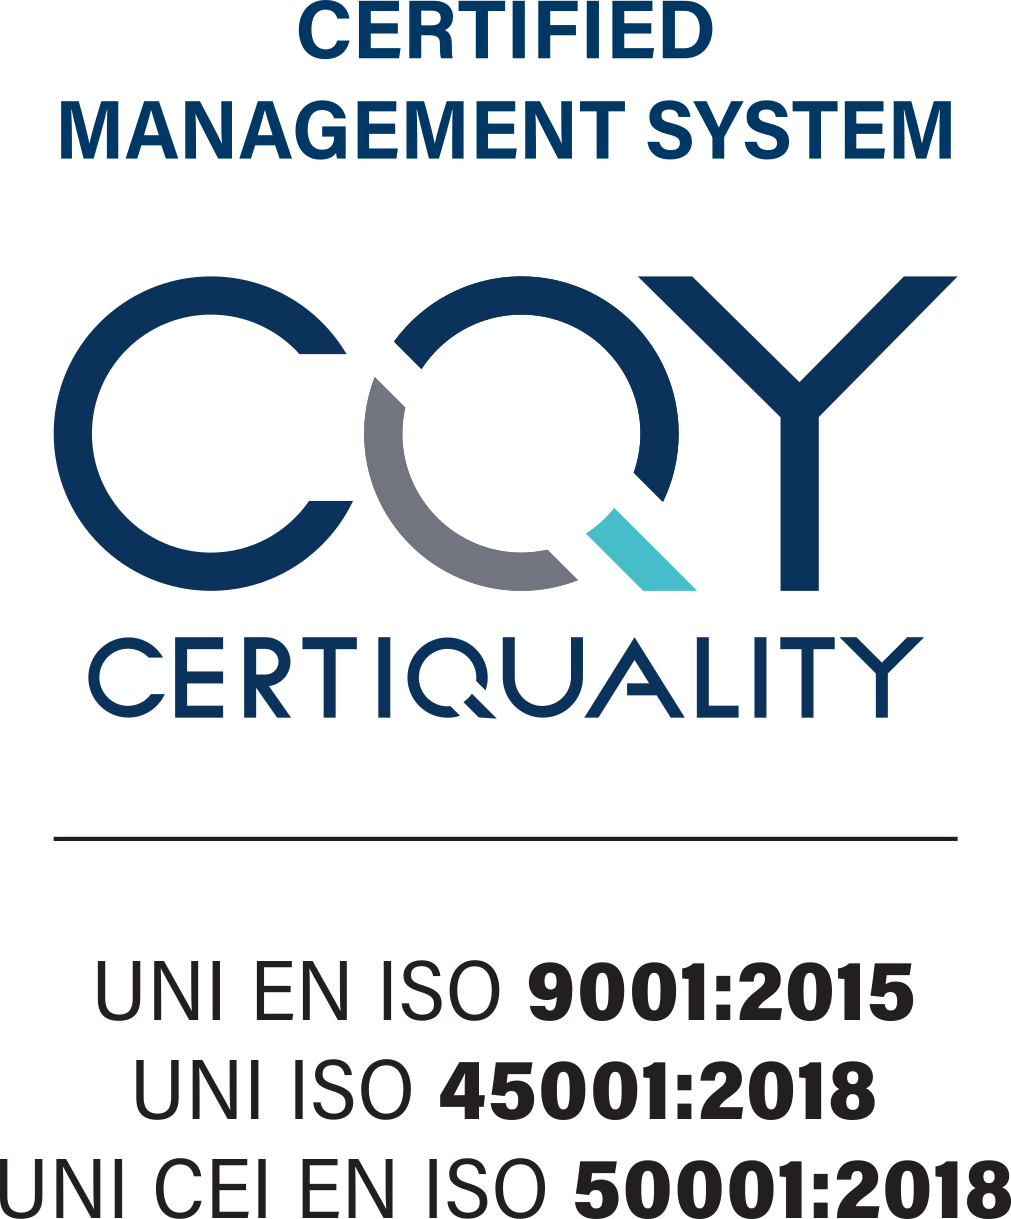 ISO 9001:2015 ISO 45001:2018 ISO 50001:2018 - CERTIQUALITY Certification